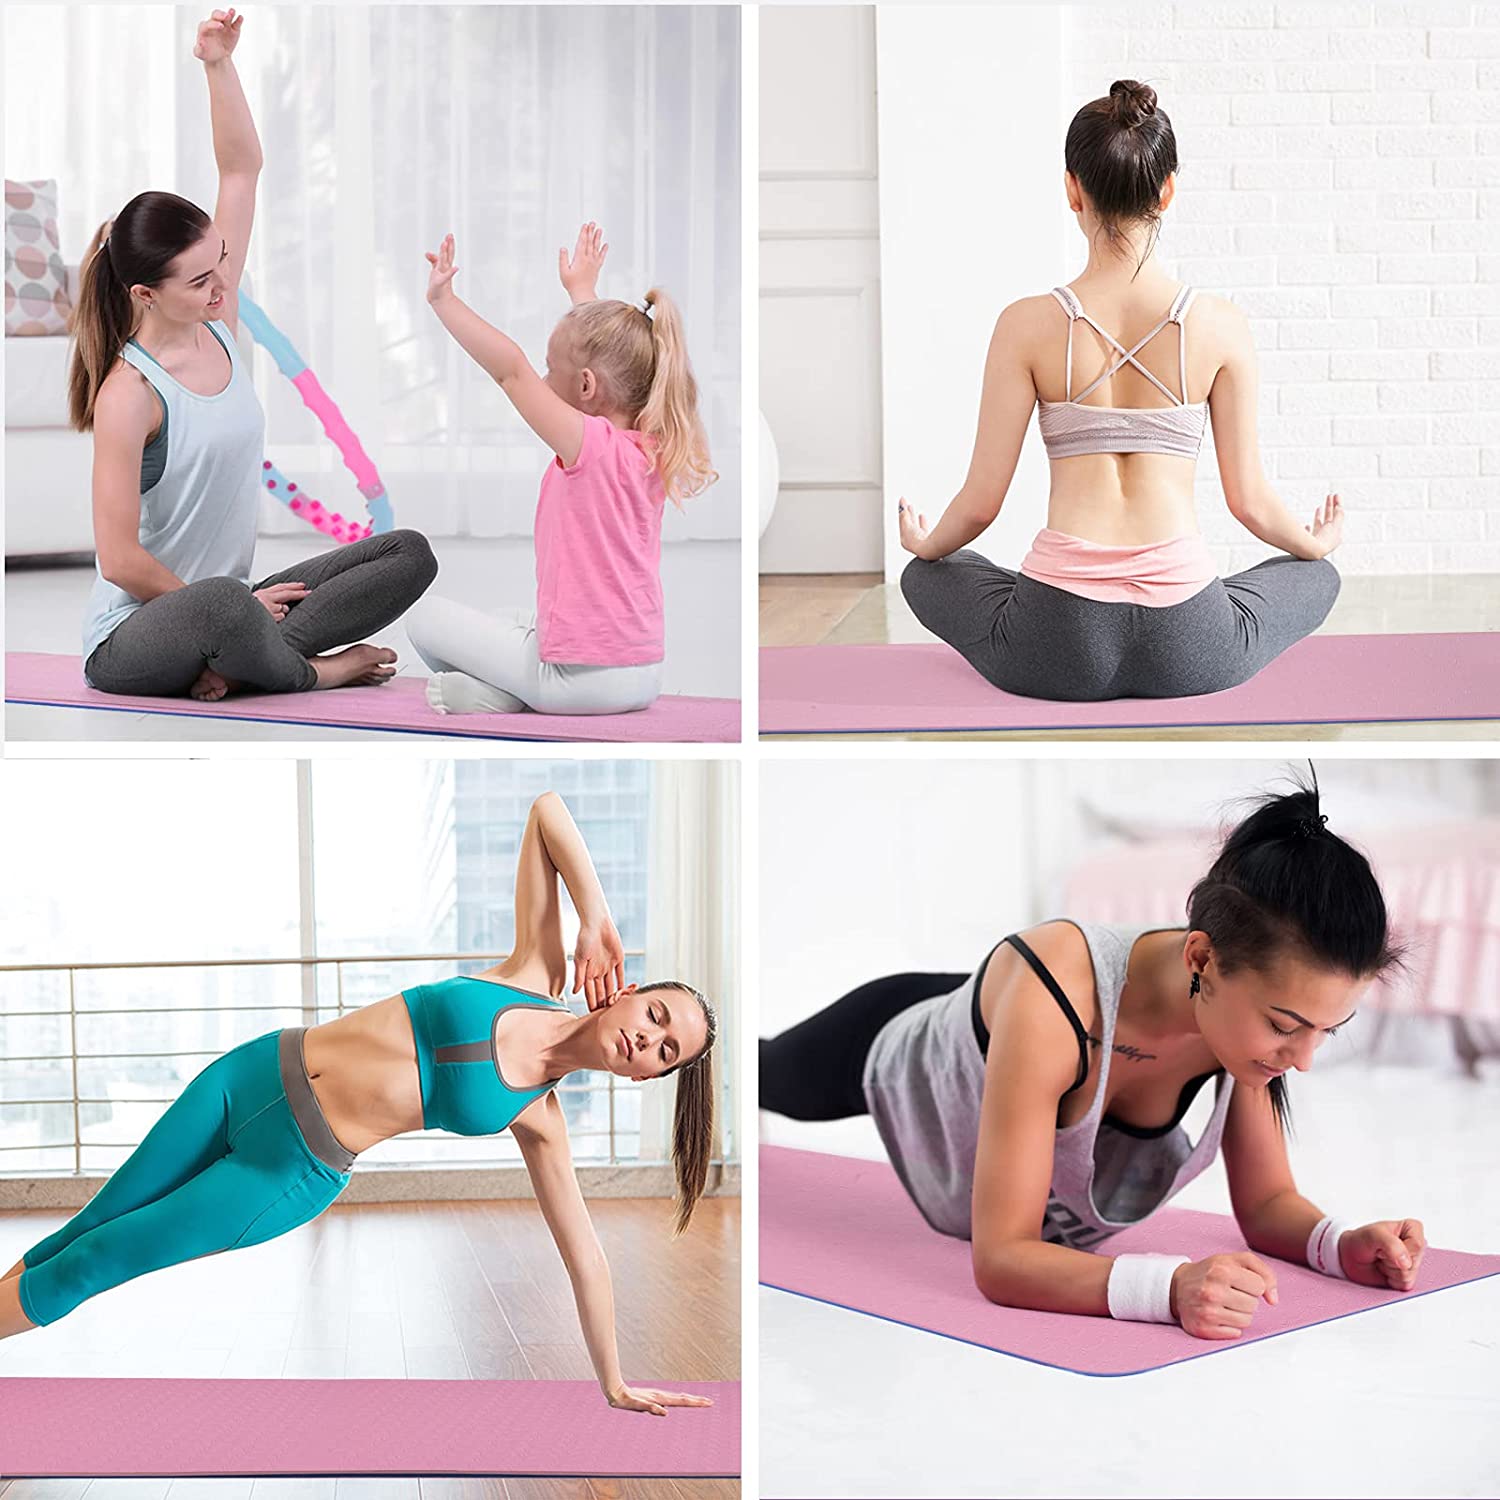 AMEXI-yoga-mat-for-women-Yoga-Mat-TPE-Workout-Mat-Extra-Thick-Non-Slip-Exercise